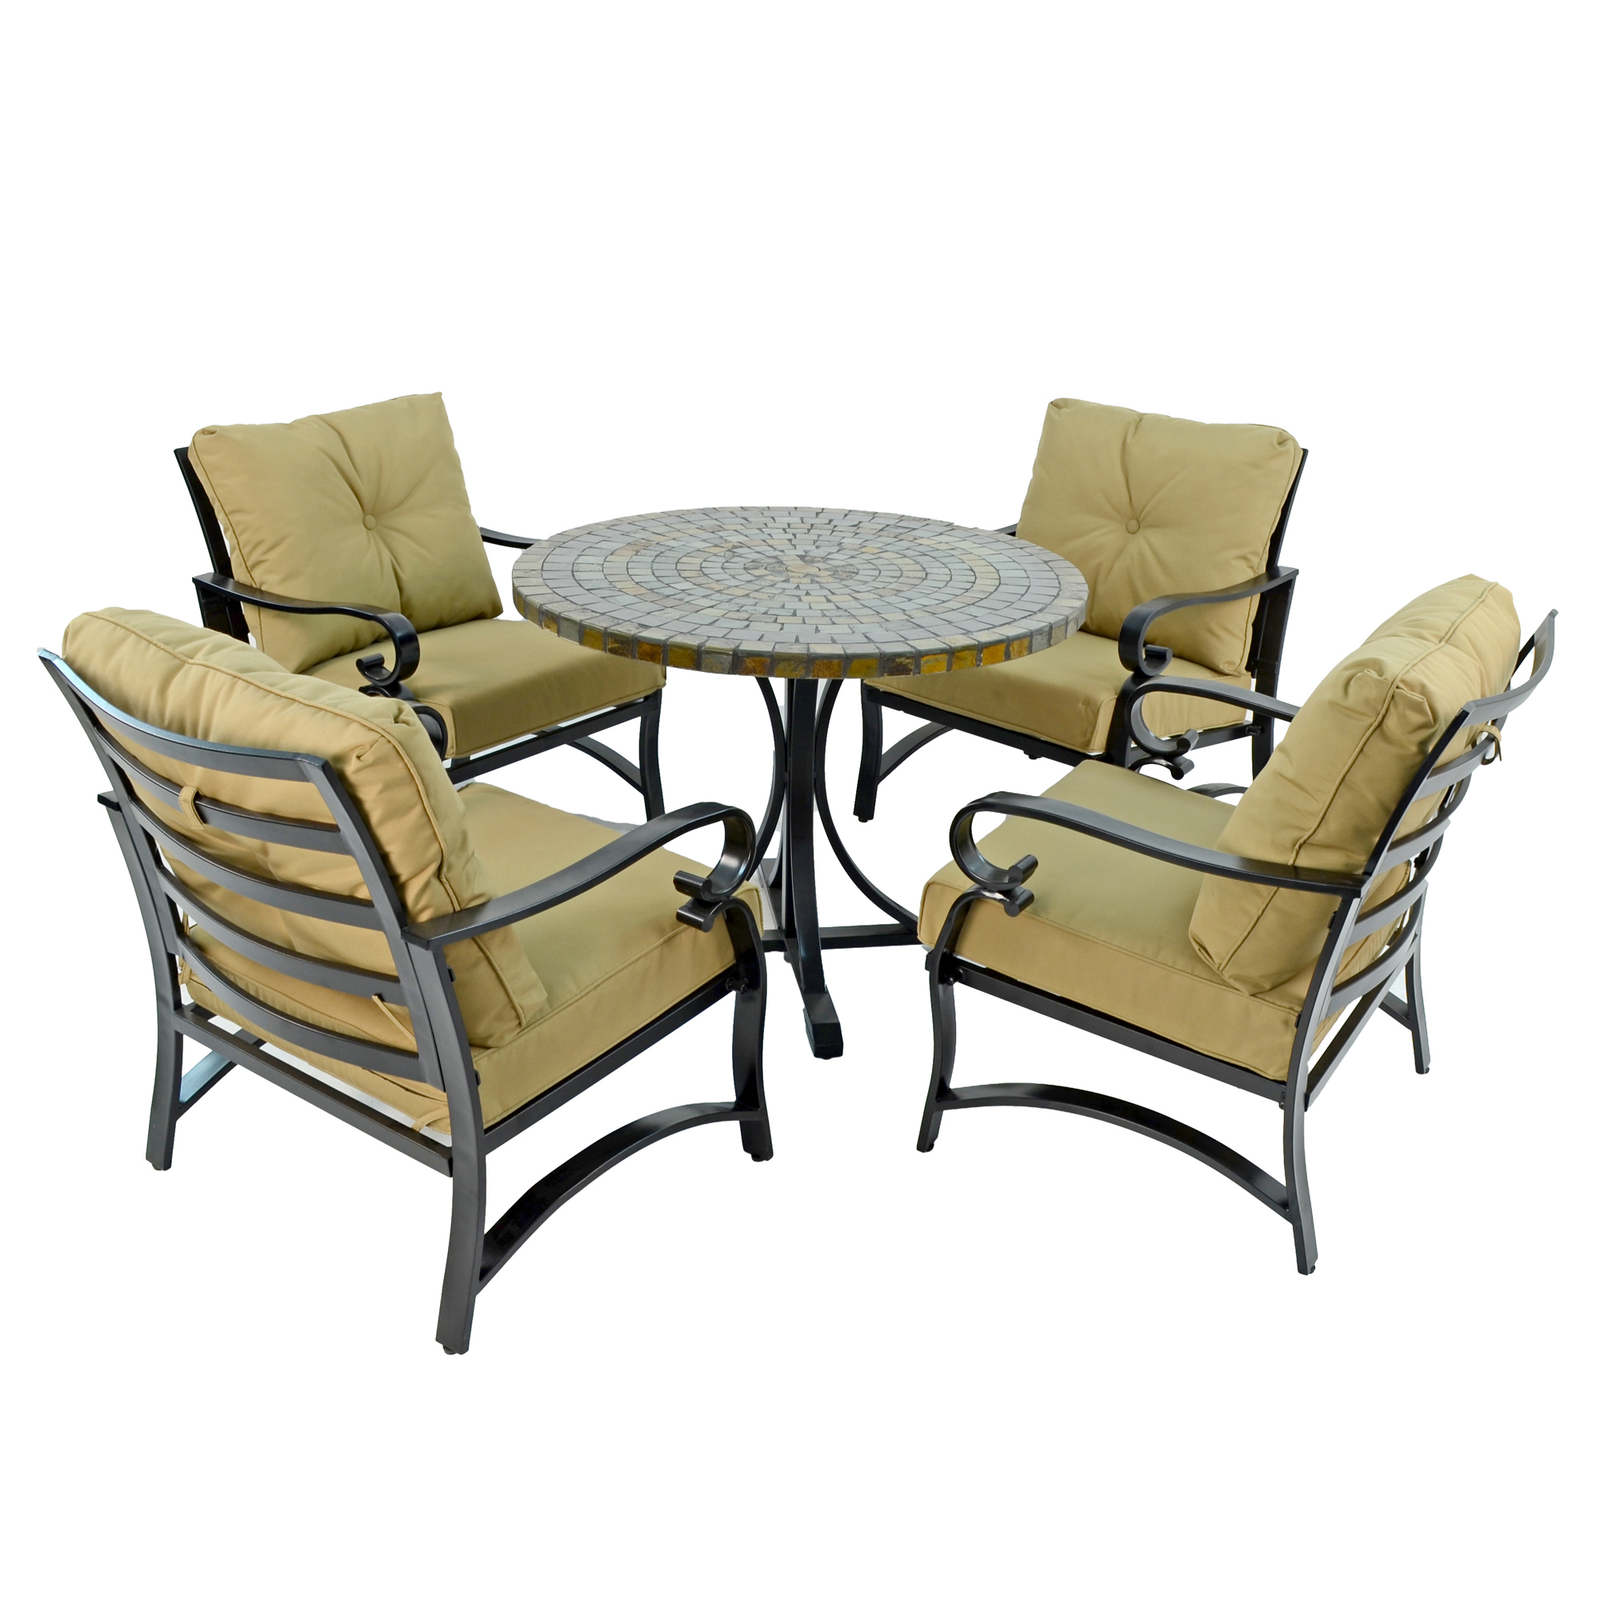 Byron Manor Monterey Garden Dining Table With 4 Windsor Lounge Chair Set Dining Sets Byron Manor   